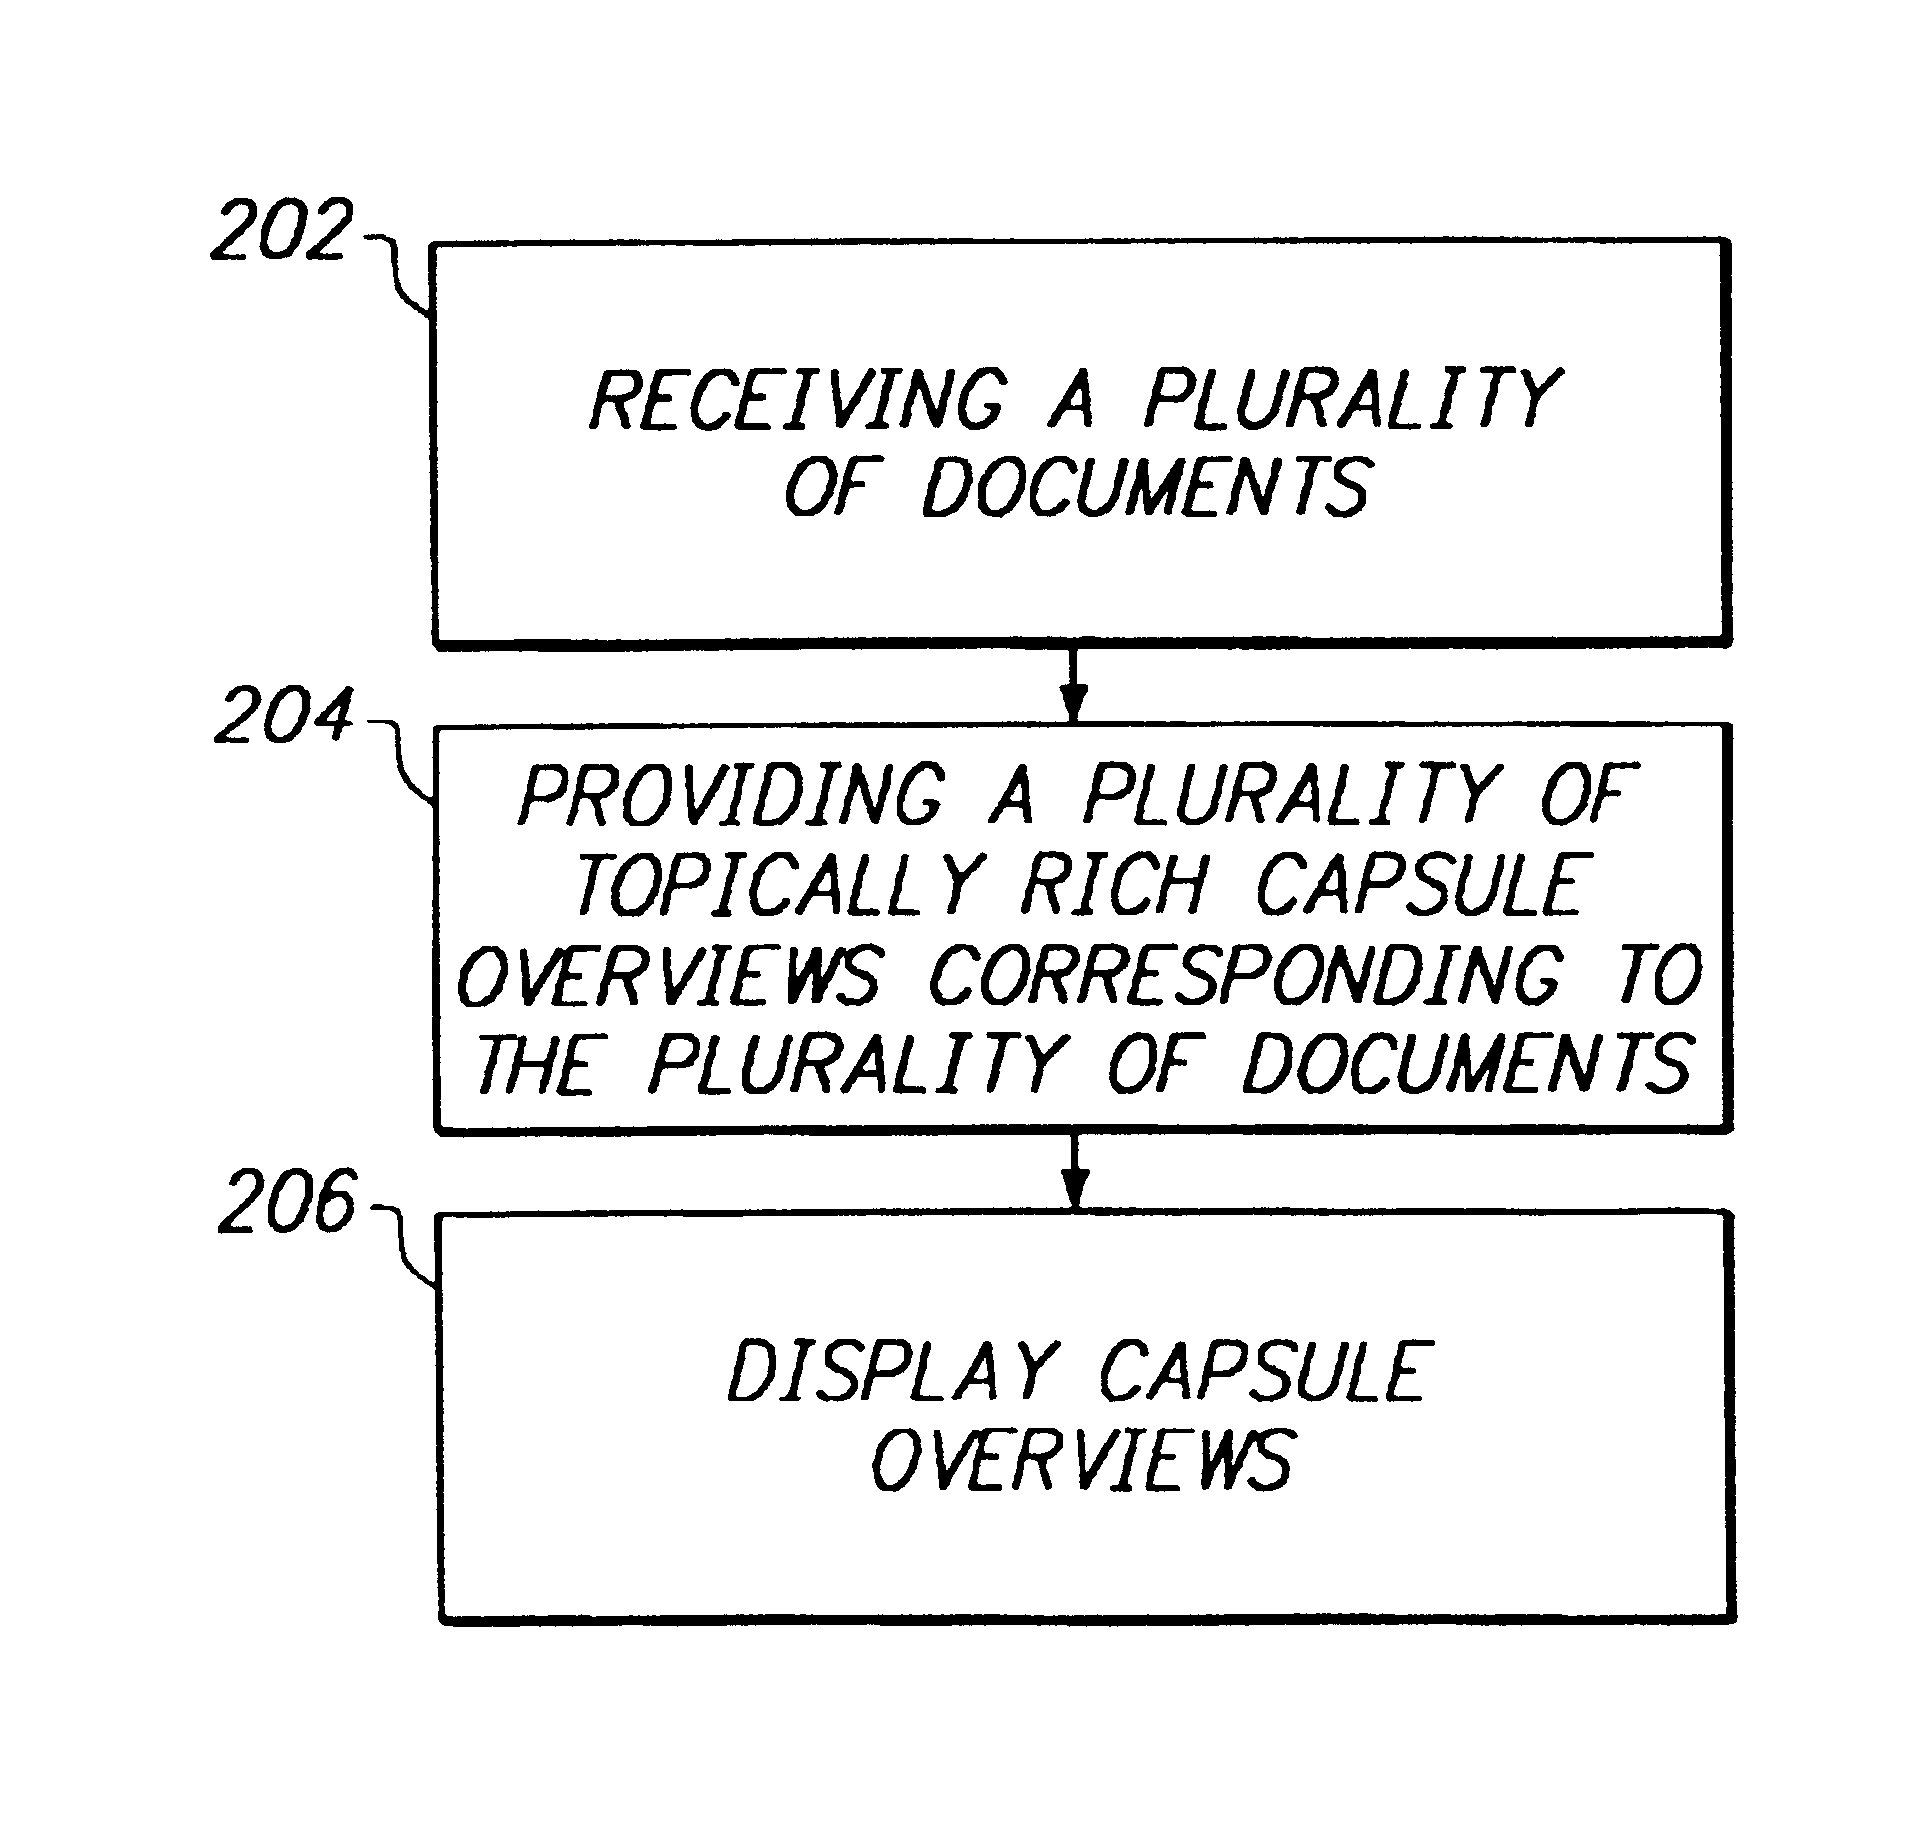 Dynamically delivering, displaying document content as encapsulated within plurality of capsule overviews with topic stamp